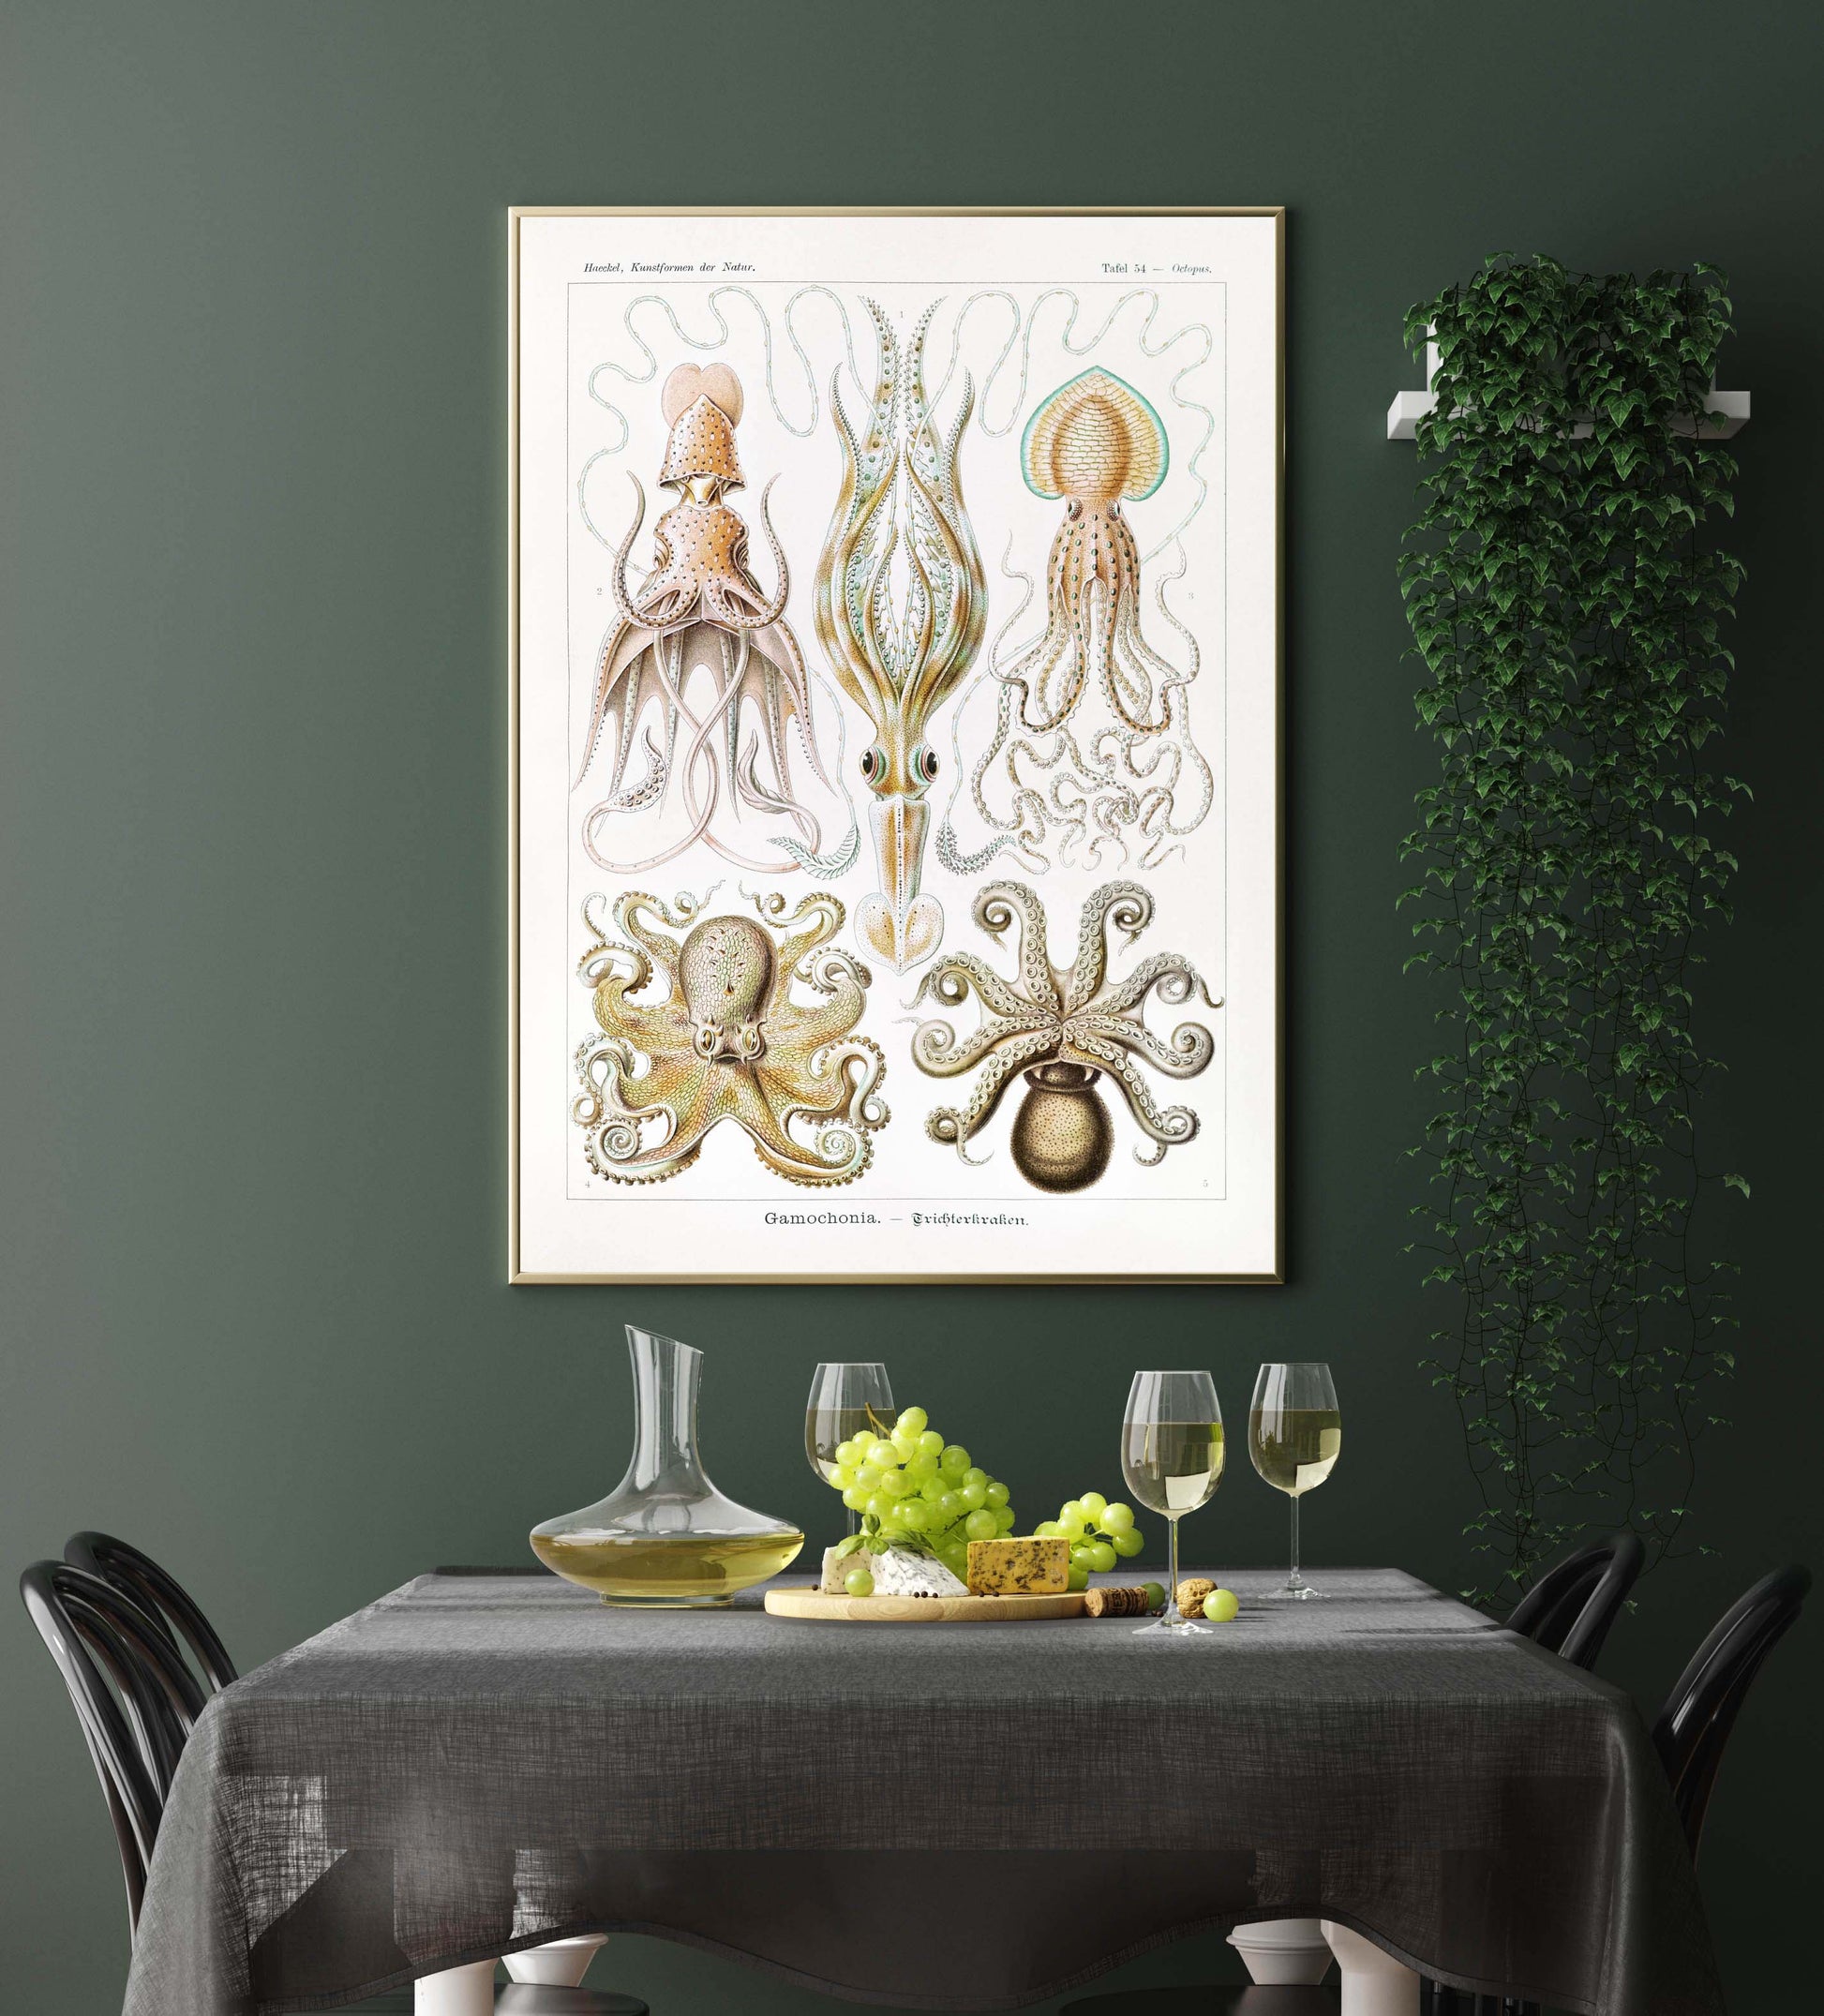 Ernst Haeckel Wall Art - Gamochonia by Ernst Haeckel Poster with borders